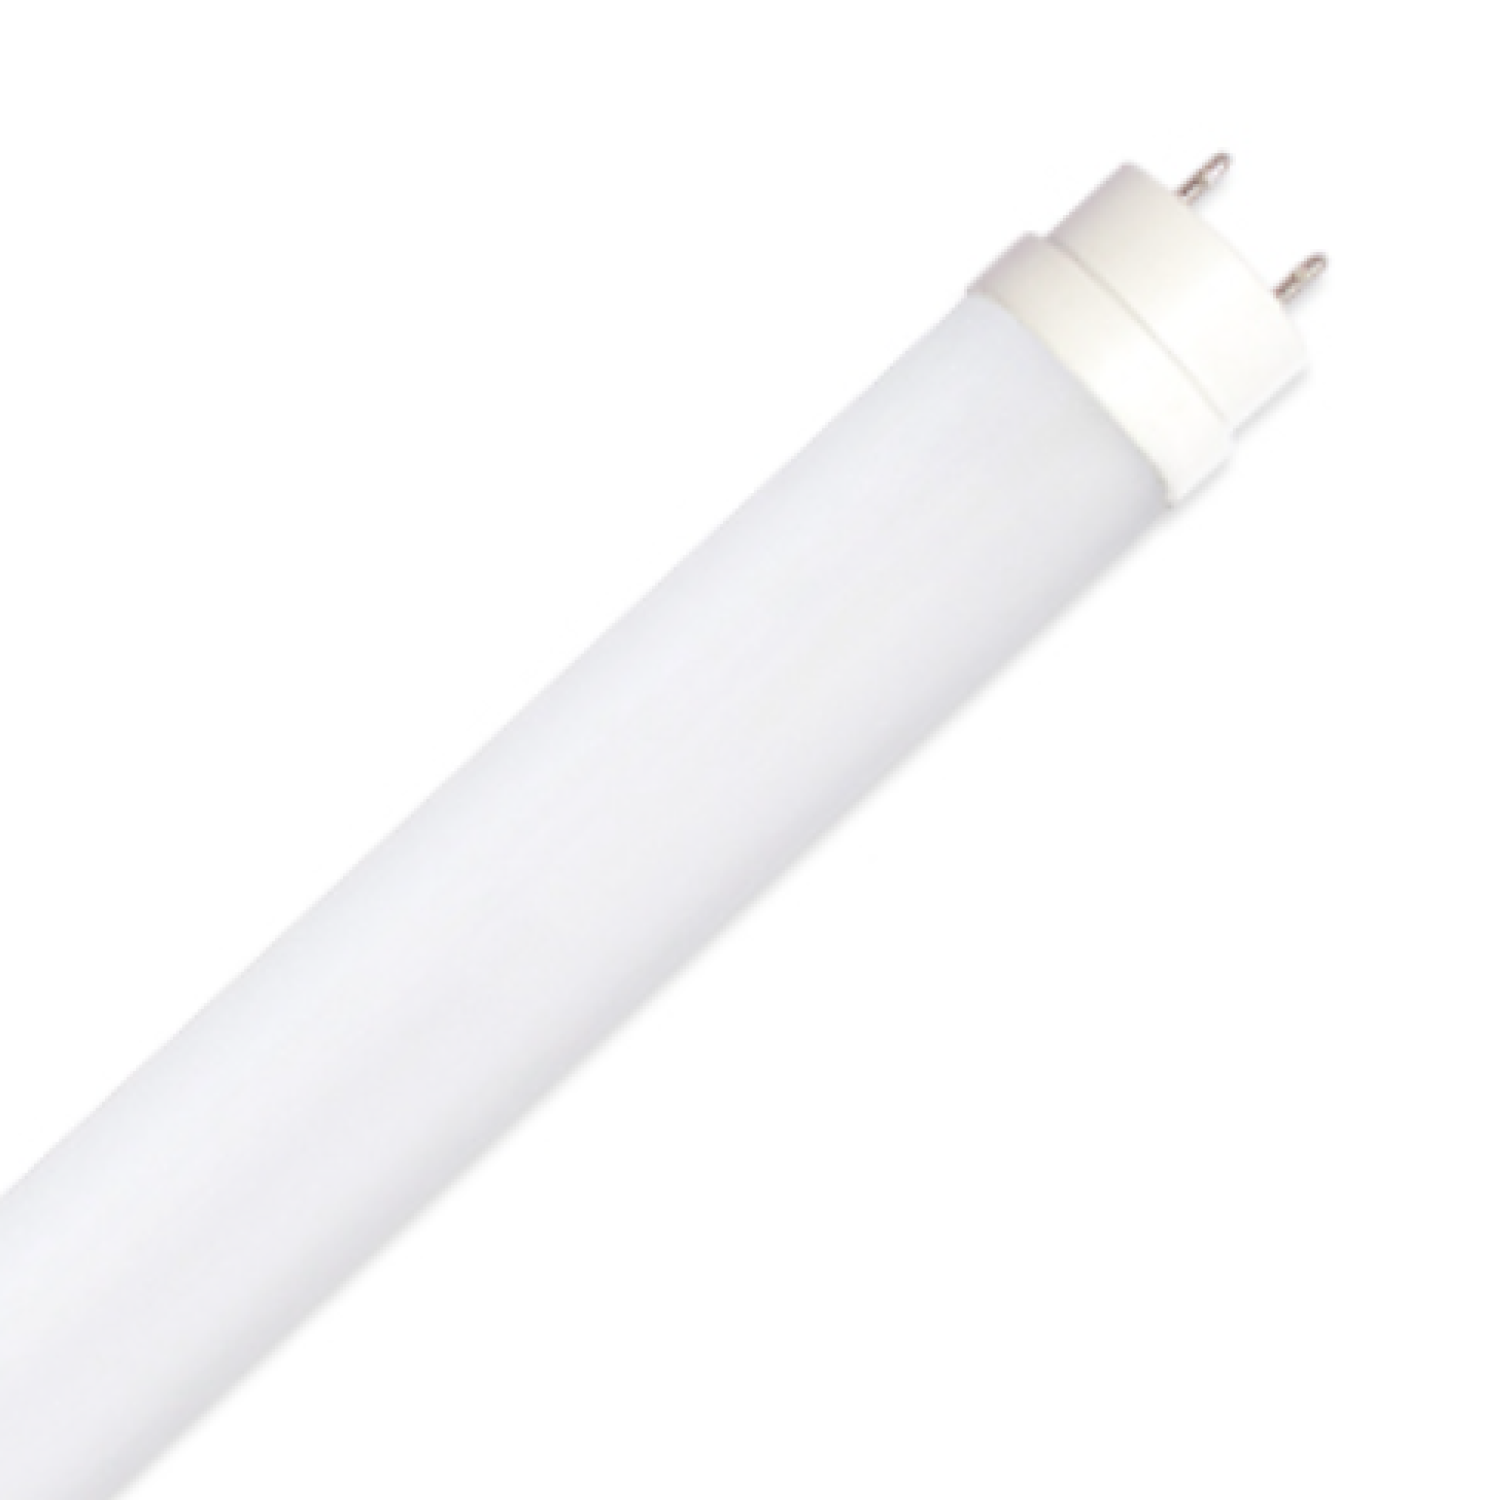 T8 frosted tube light